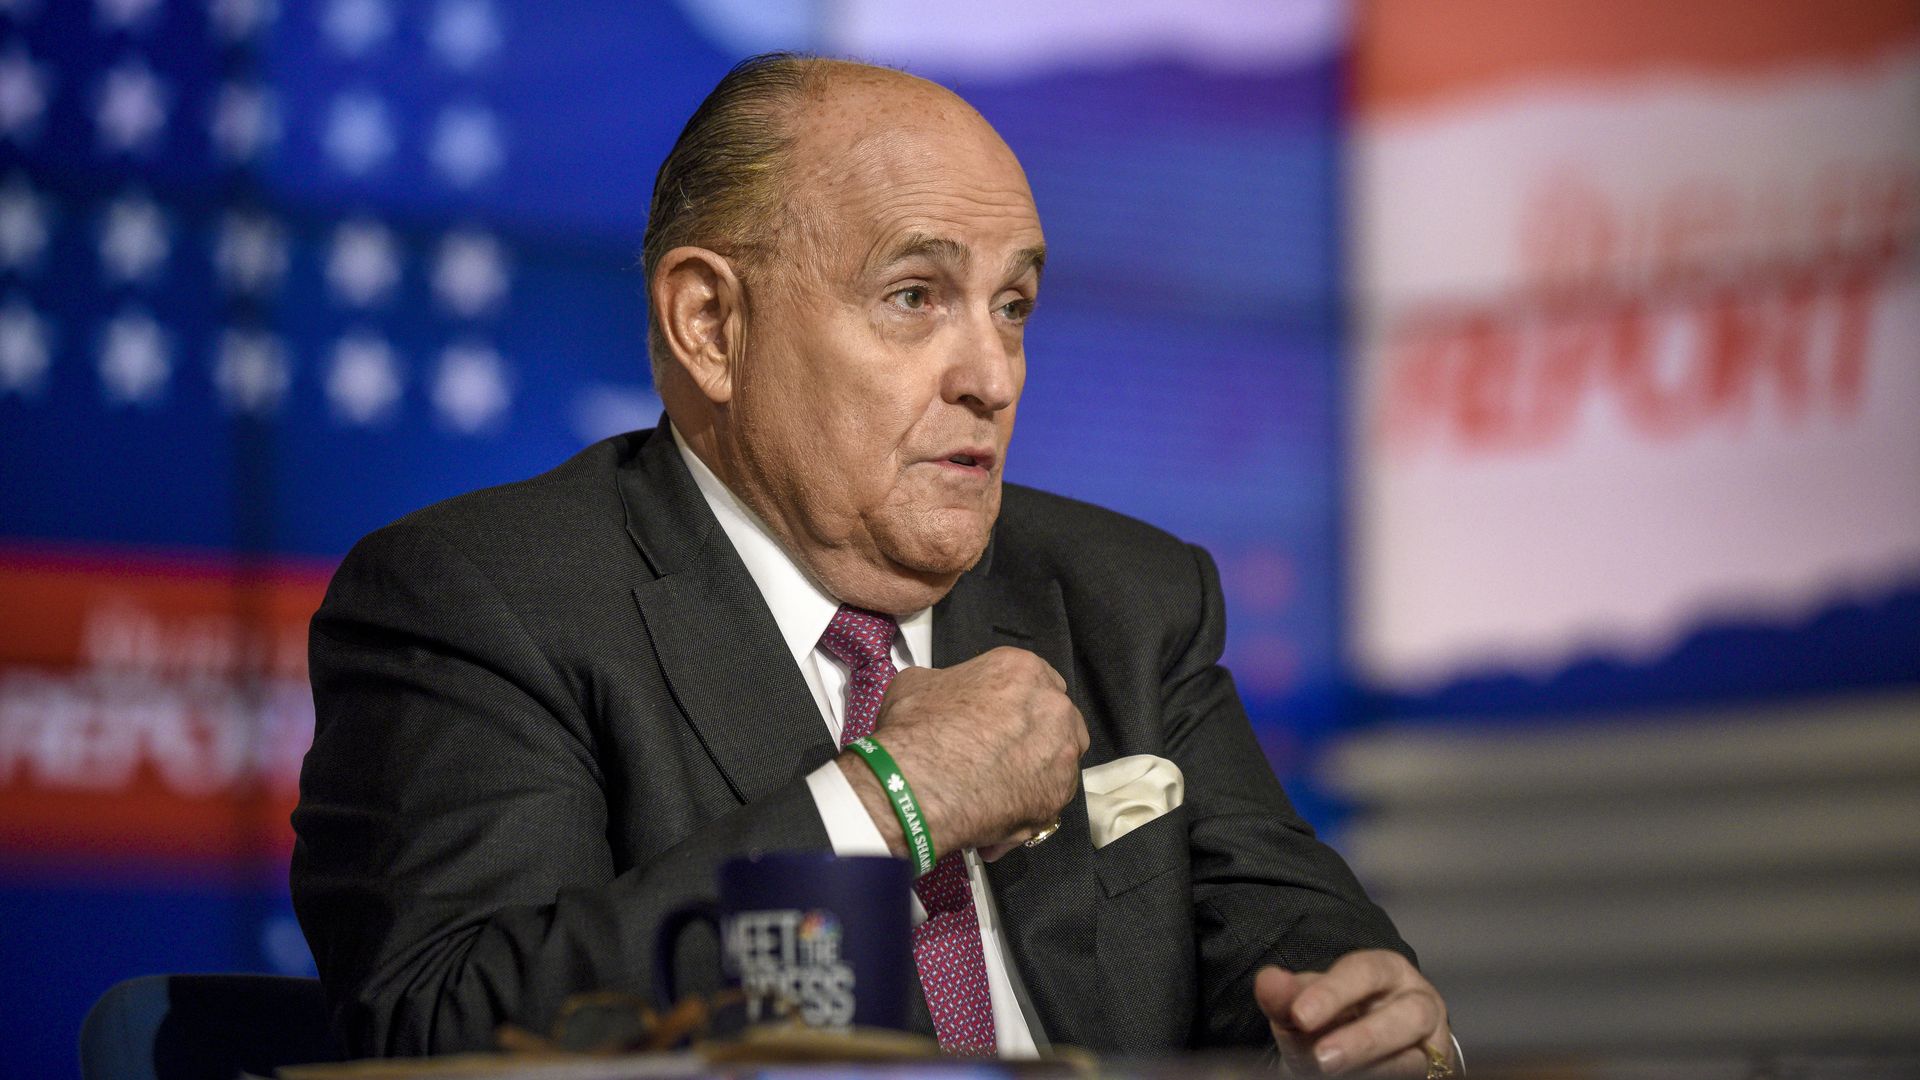 In this image, Rudy sits in a suit and tie and gestures to himself while sitting at a desk with the American flag in front of him.